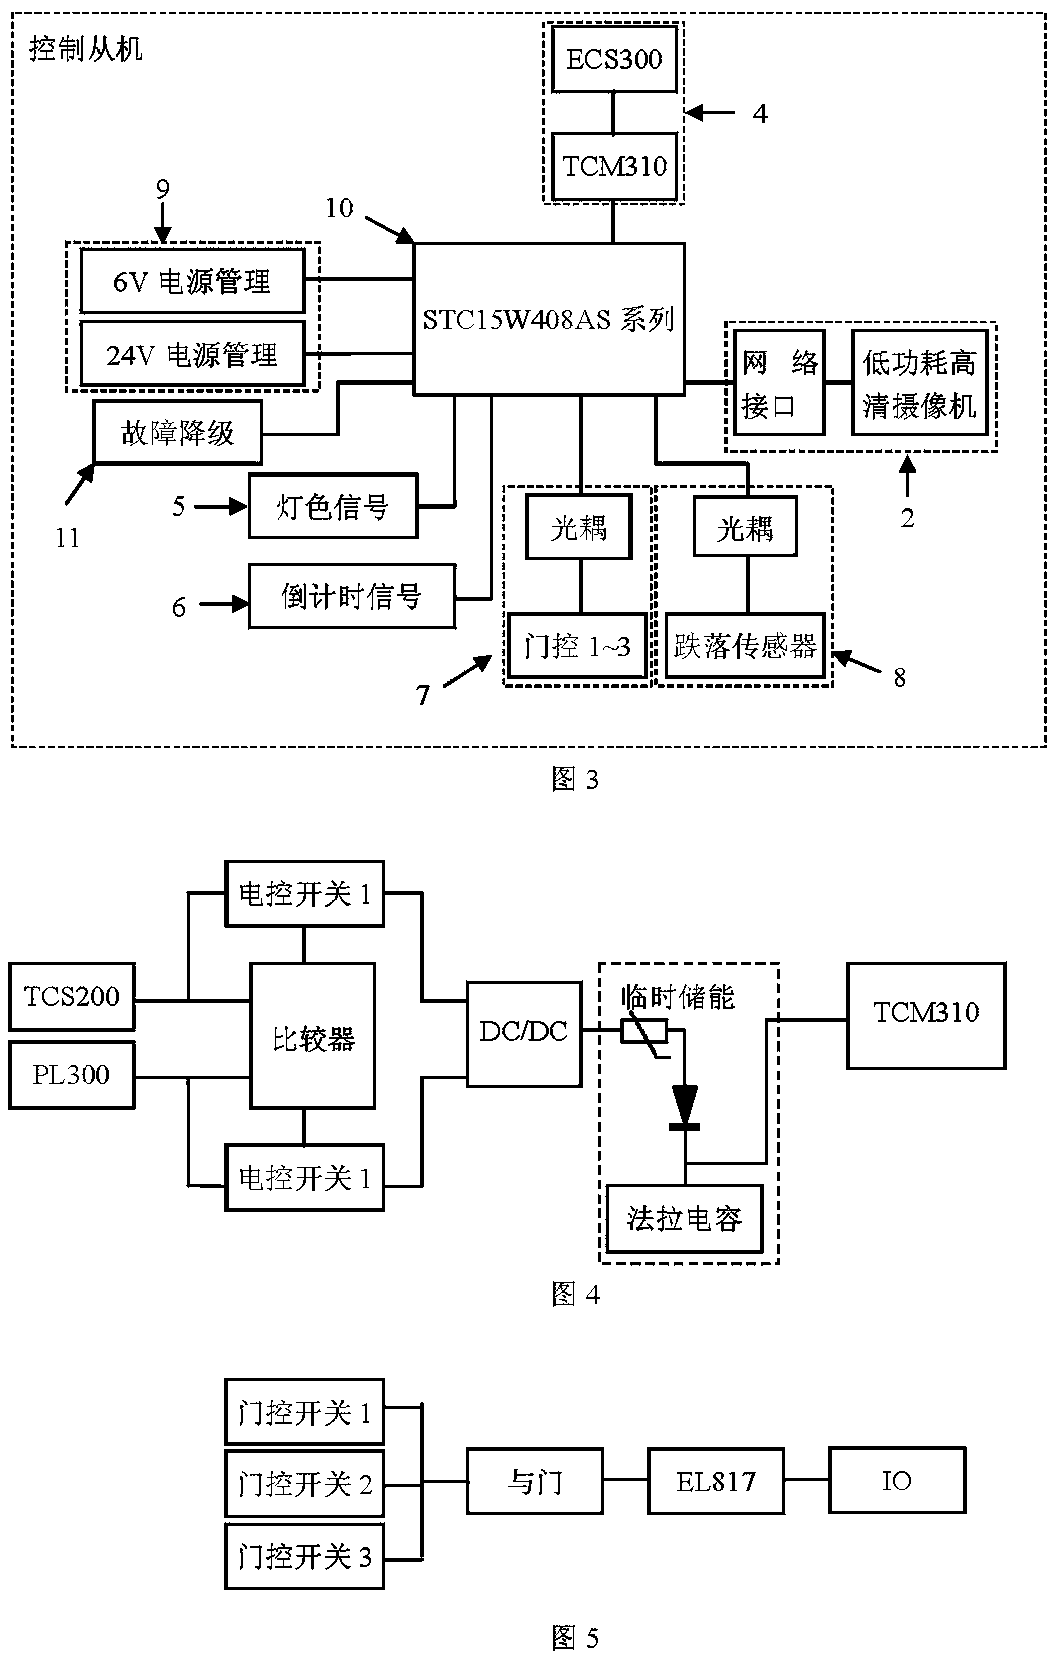 Wireless communication transportation signal control device and control method